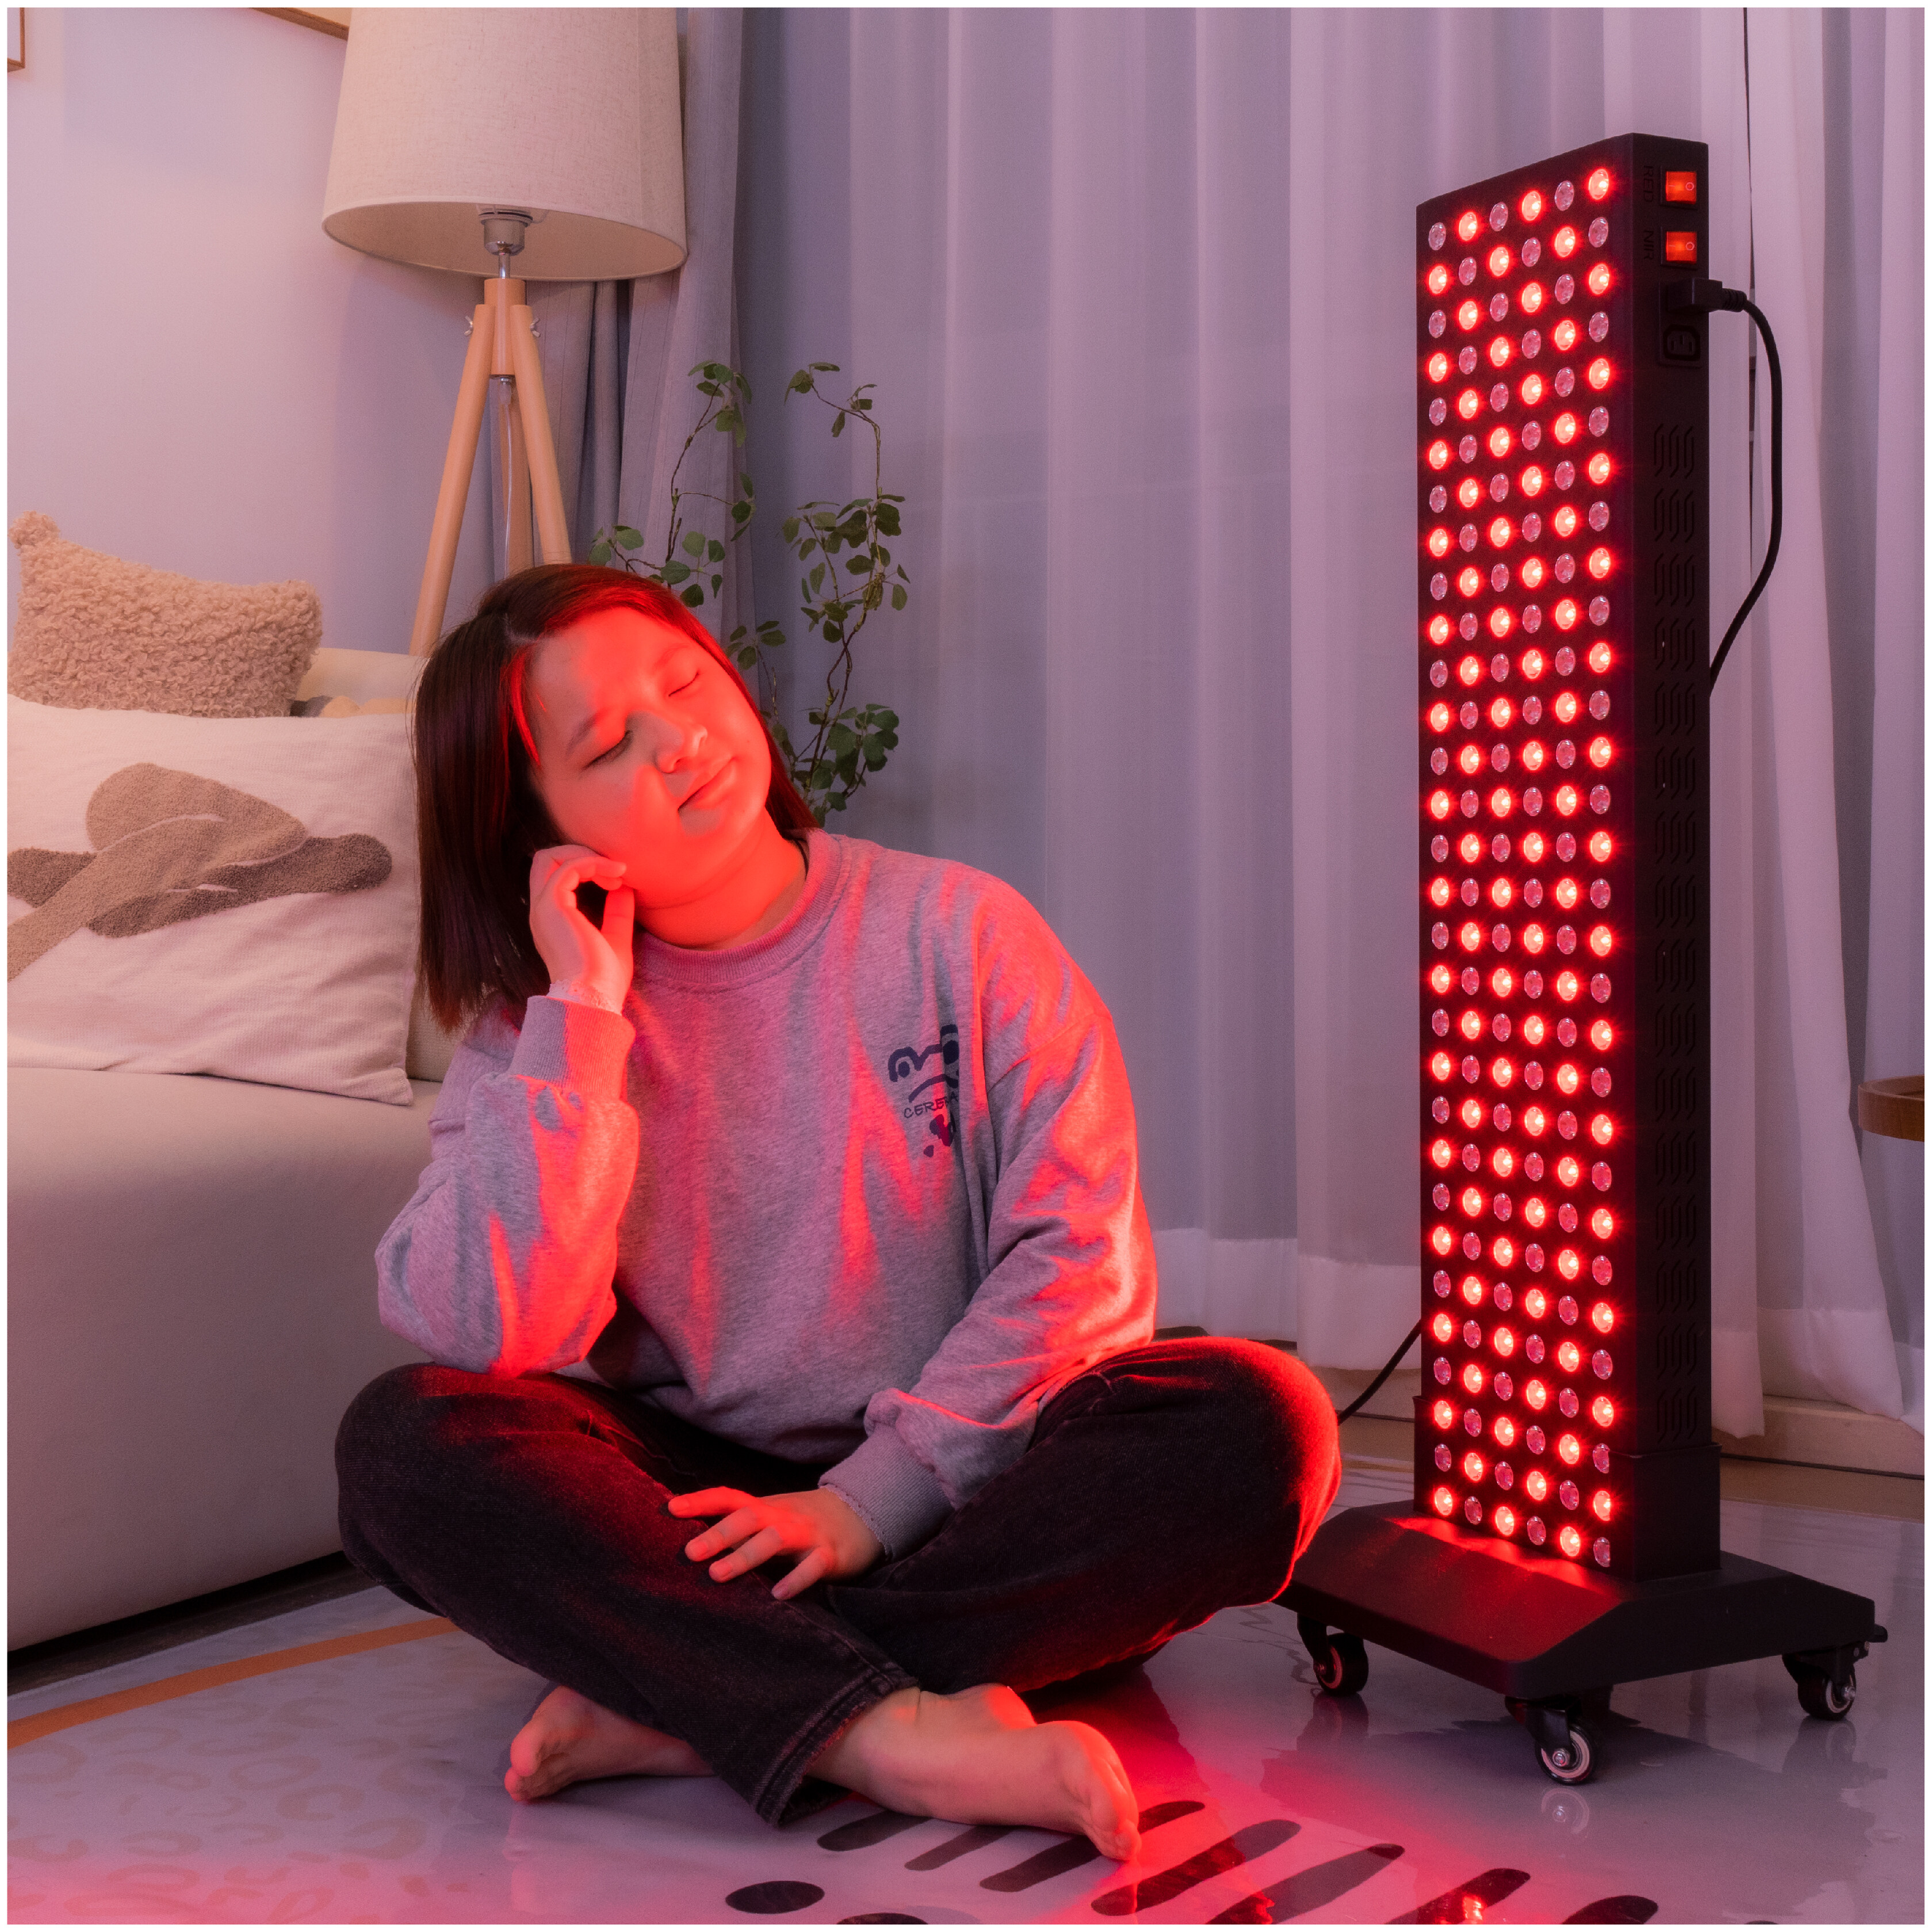 infrared led light therapy skin care device, serious skin care light therapy, infrared led light therapy devices, led light therapy devices for skin care, skin care light therapy device